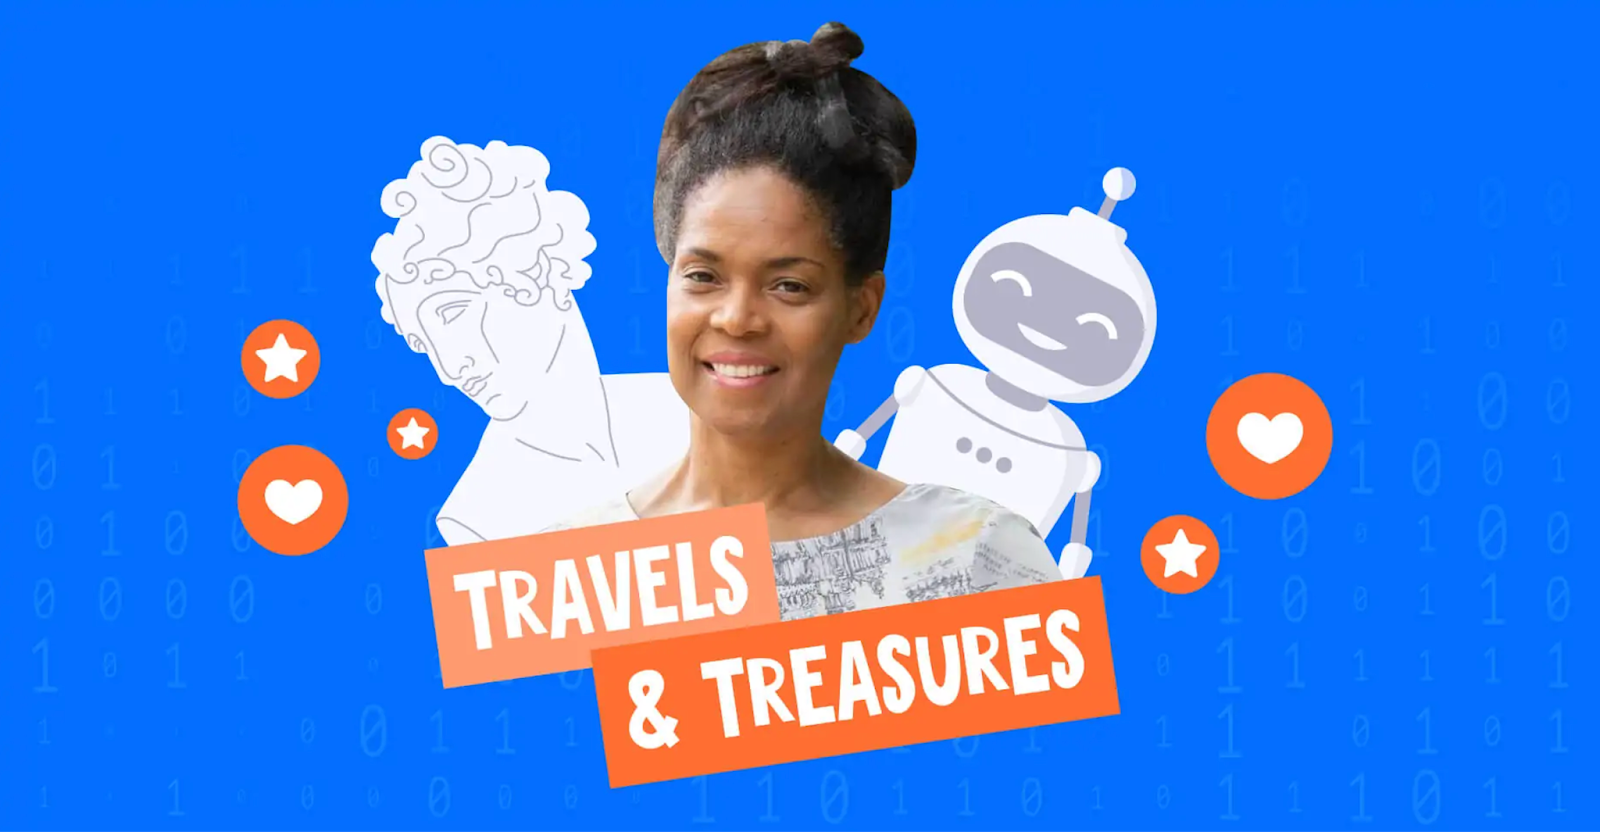 Tanya from Travels and Treasures smiling on a blue background with orange text and two white graphics on each side.